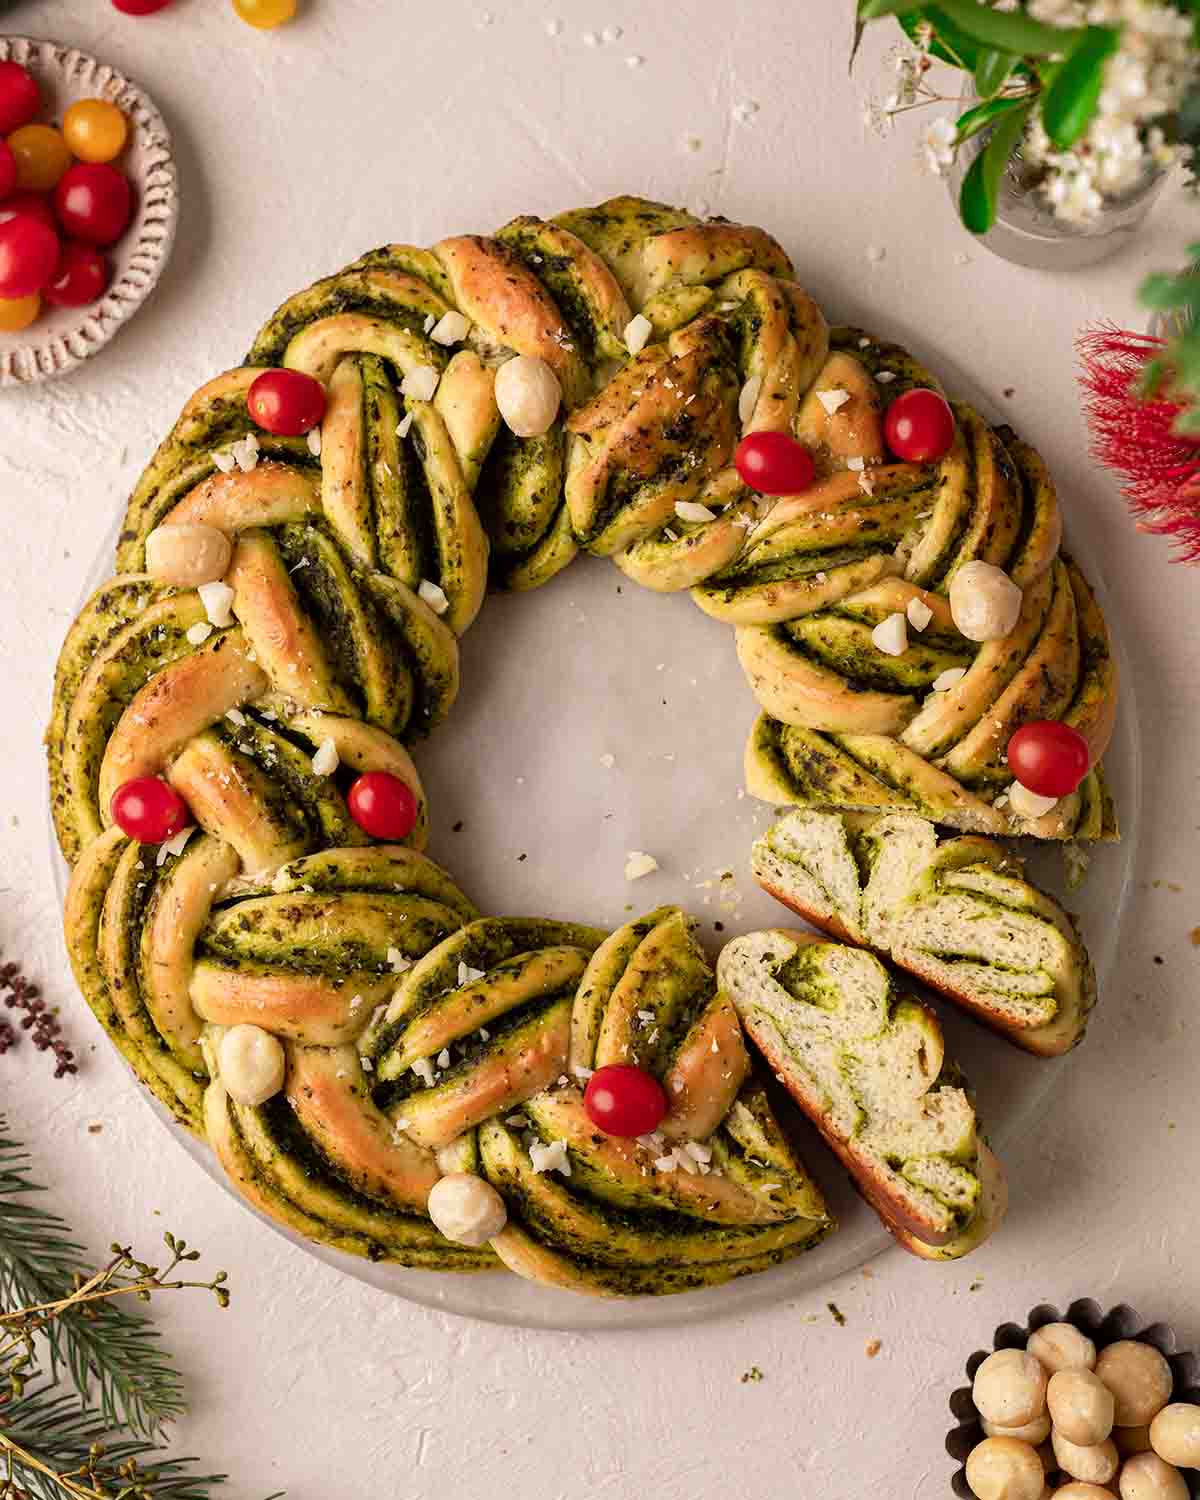 Overhead image of vegan pesto wreath with few slices coming out showing layers of pesto and bread.